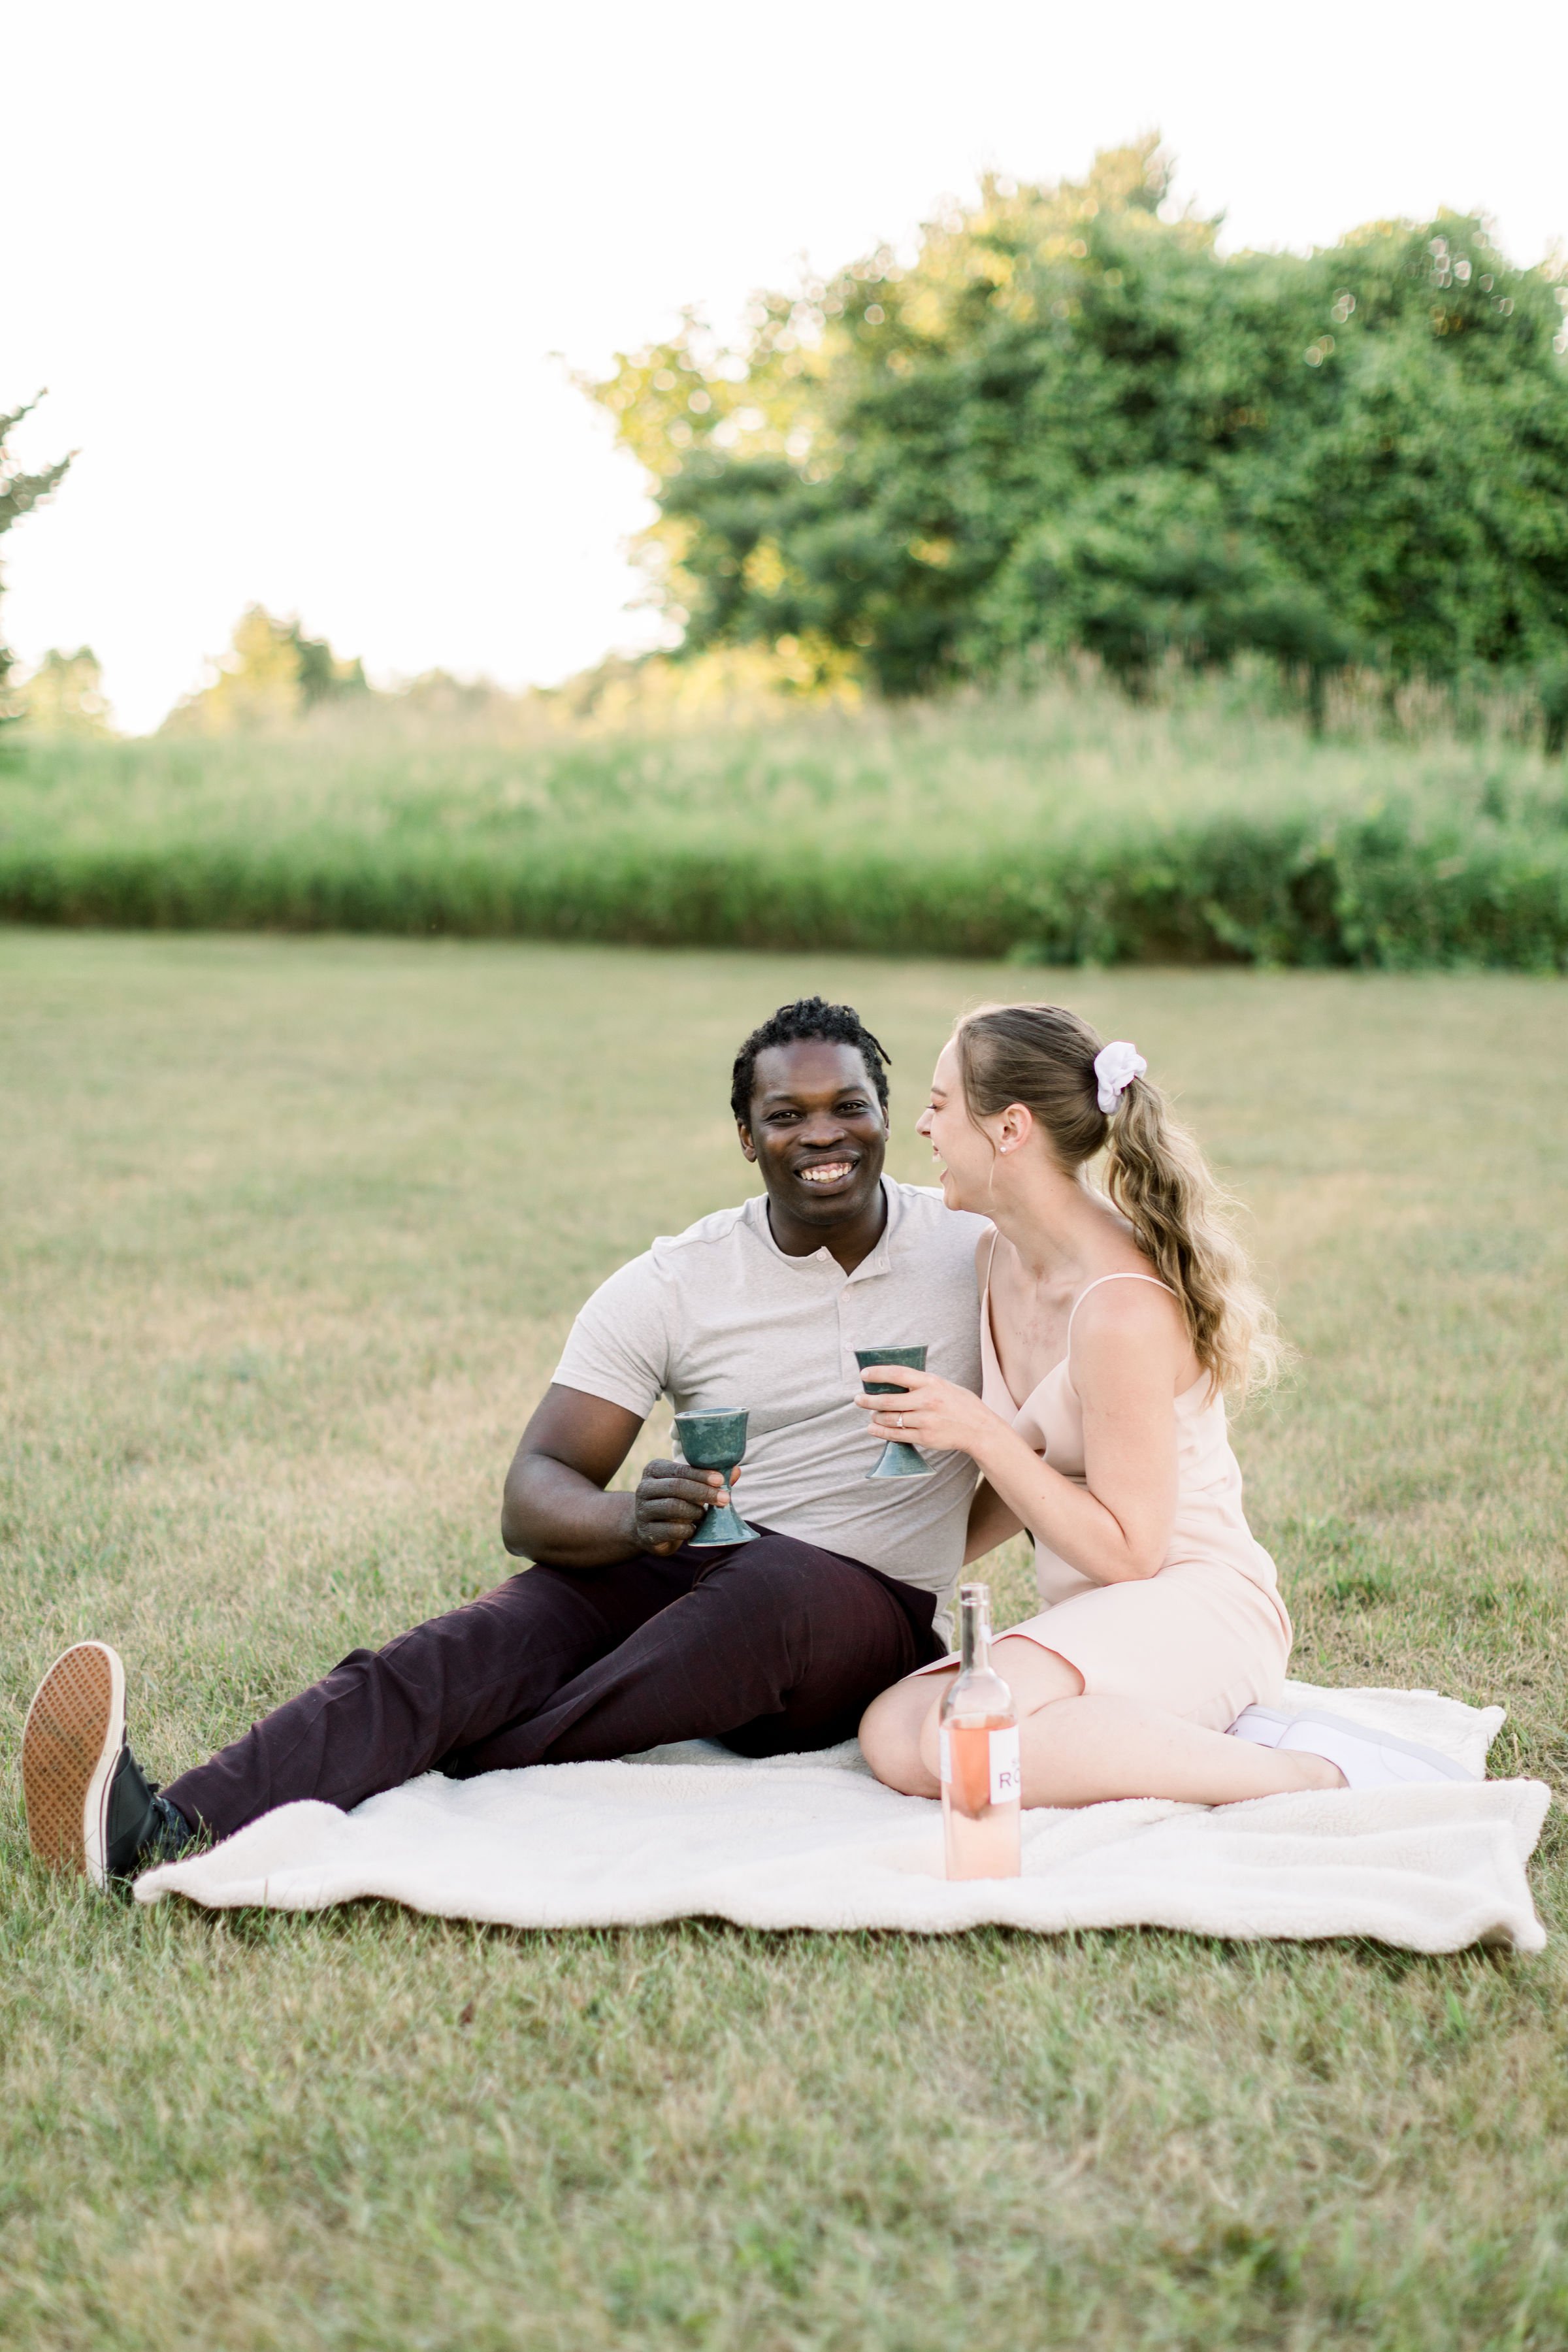  Chelsea Mason Photography captures a couple sitting on a blanket toasting. toasting on a blanket engagements with champagne #Chelseamasonphotography #Chelseamasonengagements #Onatarioengagements #Pinhey'sPoint #Ontarioweddingphotographers 